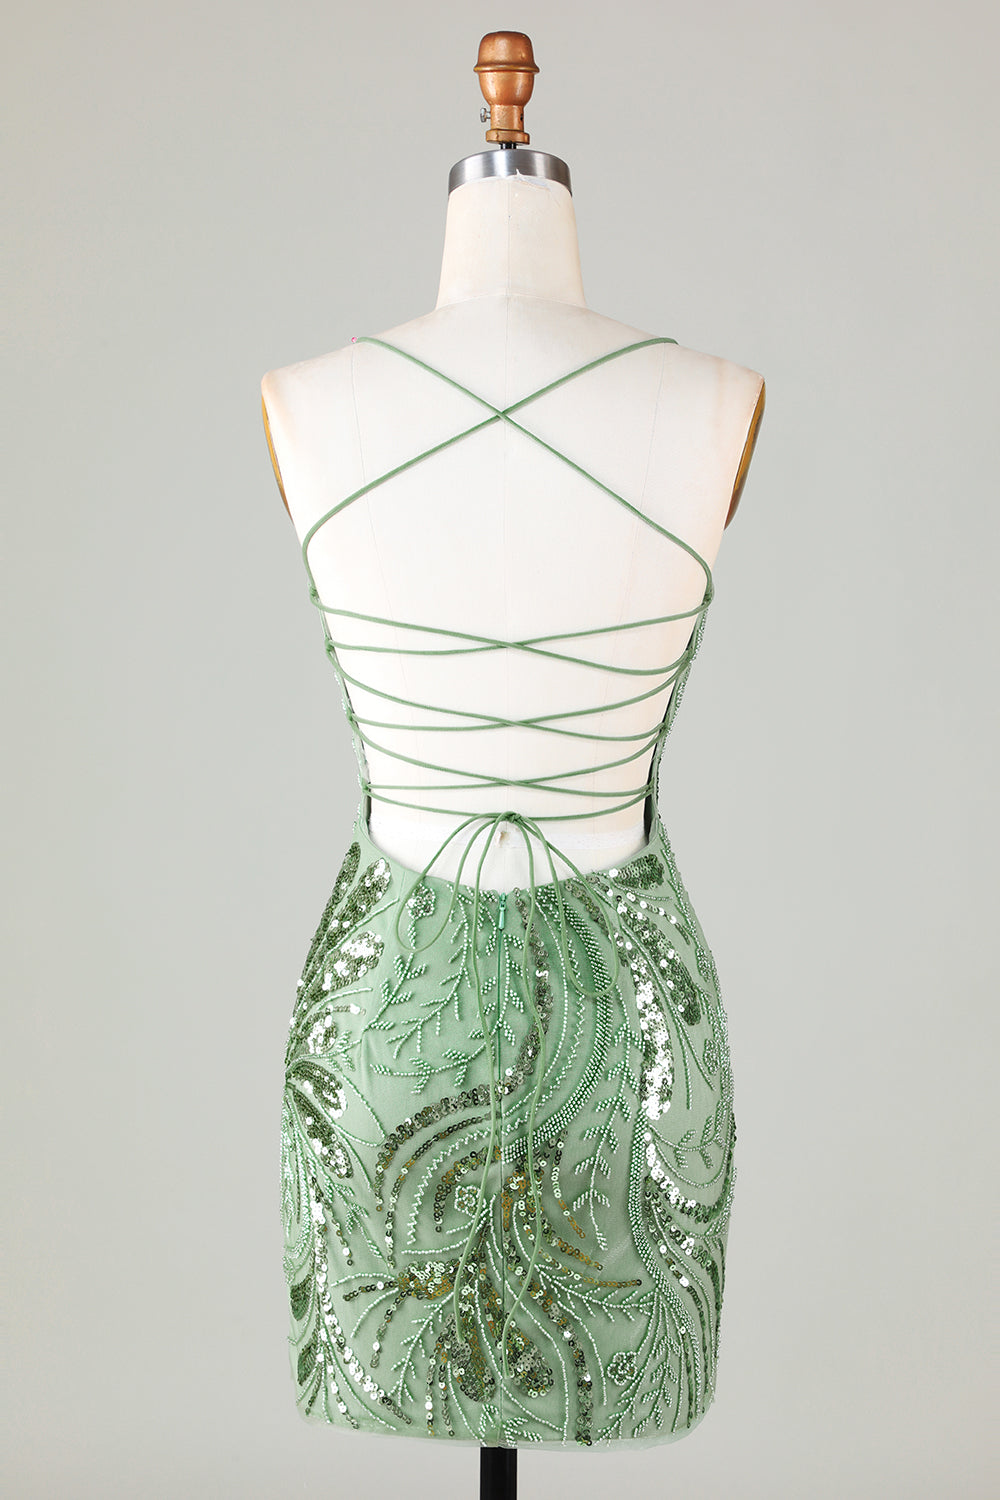 Sparkly Green Beaded Backless Tight Sequins Short Homecoming Dress